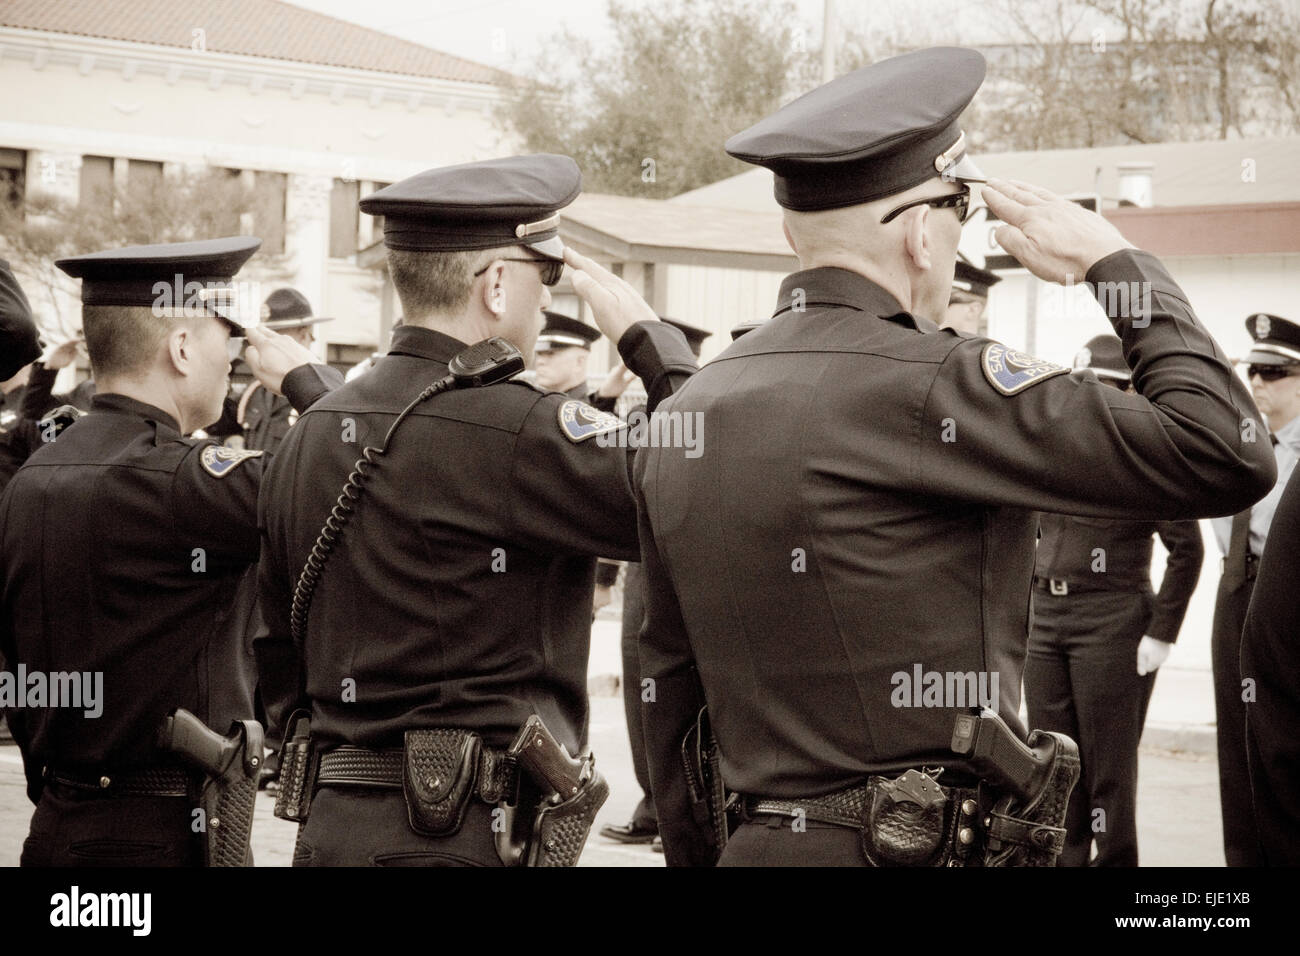 Police Officer Salute Stock Photo